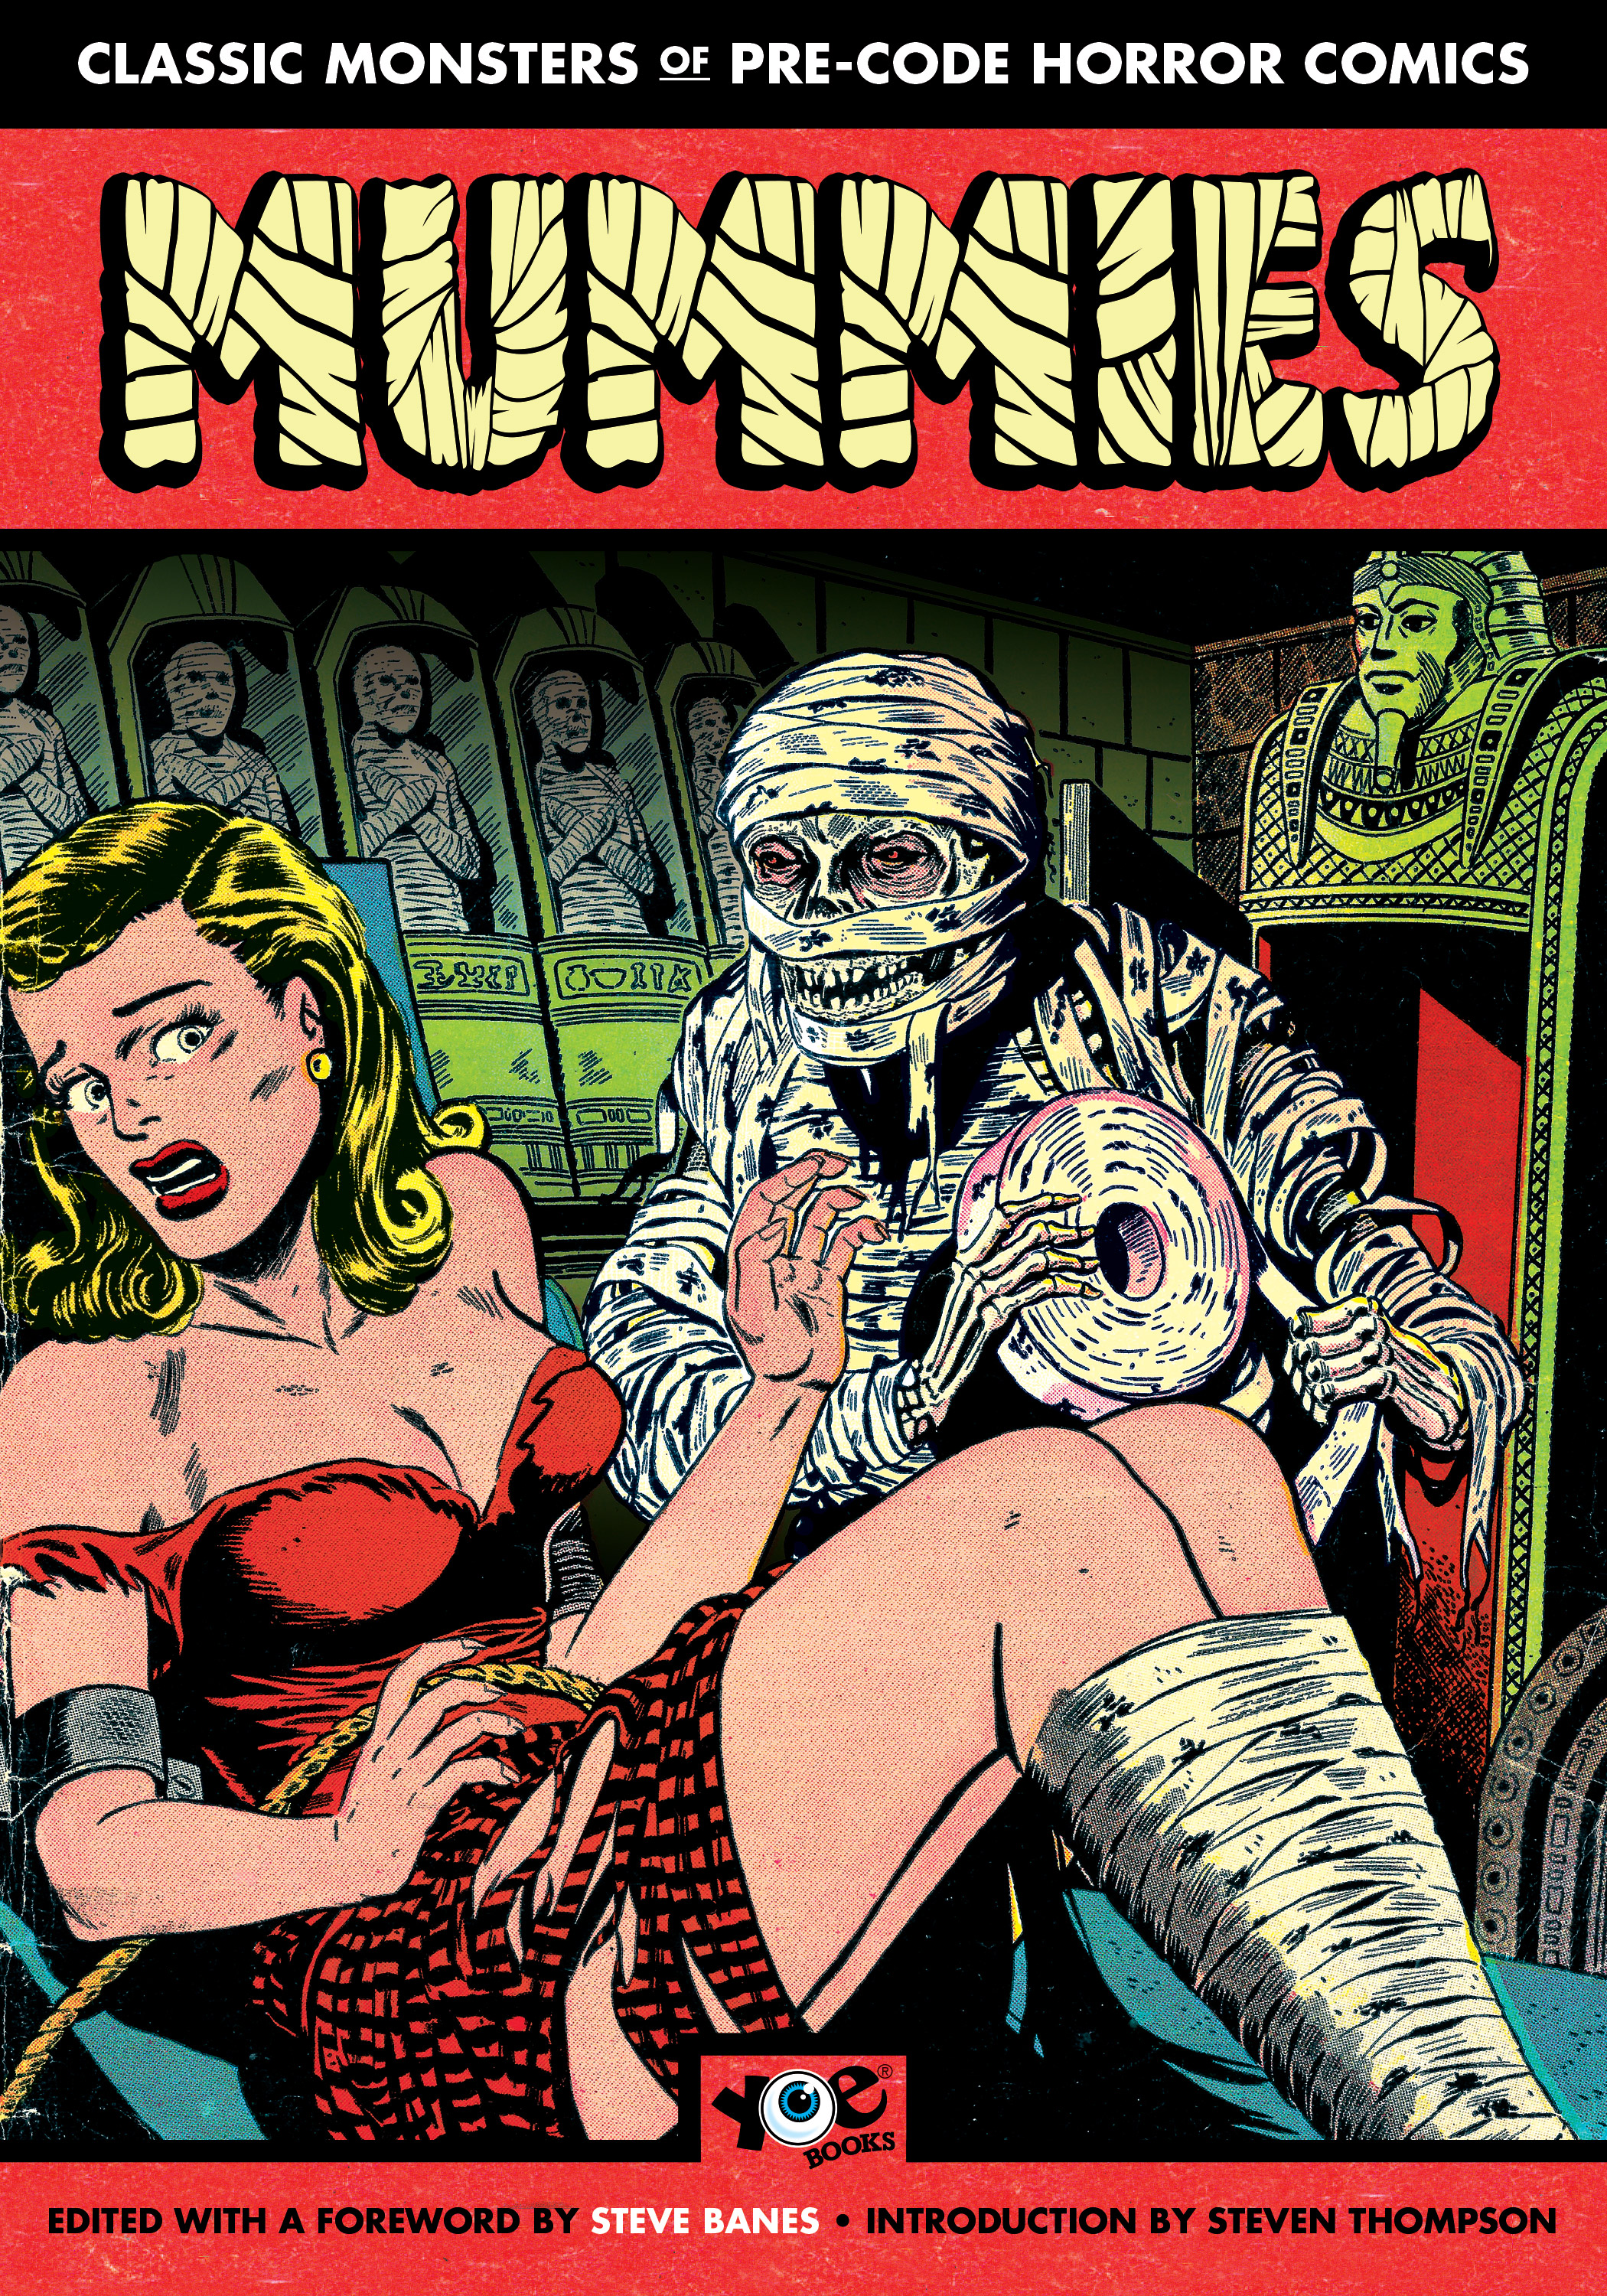 Read online Classic Monsters of Pre-Code Horror Comics: Mummies comic -  Issue # TPB - 1